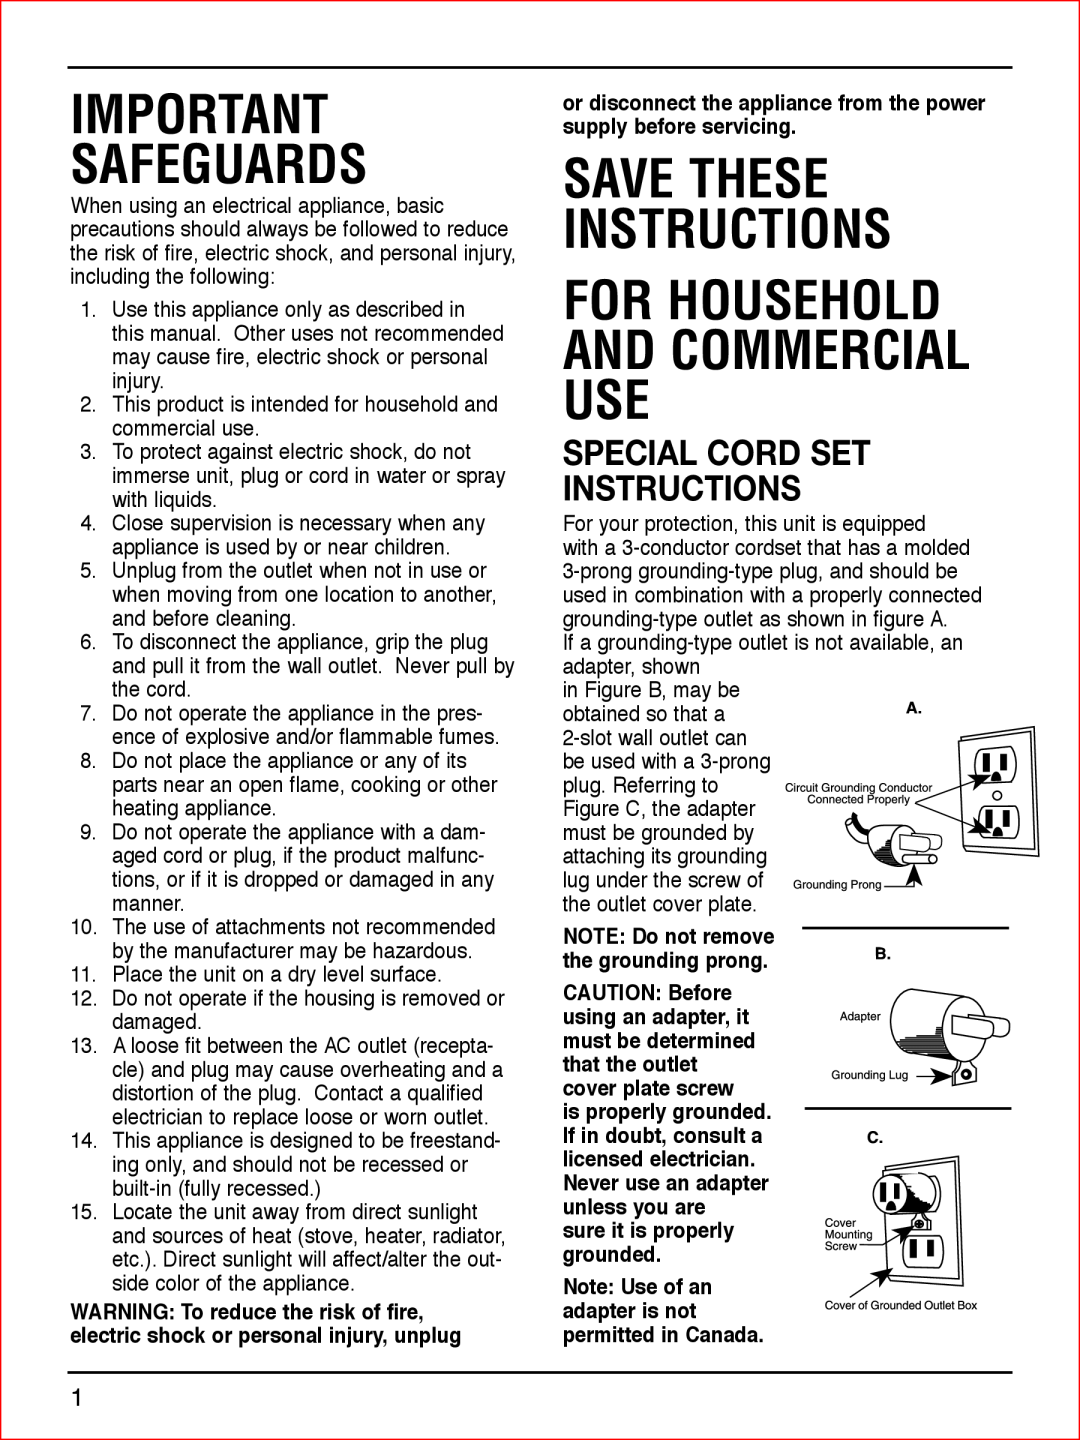 Cuisinart CWC-900C Special Cord Set Instructions, Safeguards, Save These Instructions For Household And Commercial Use 